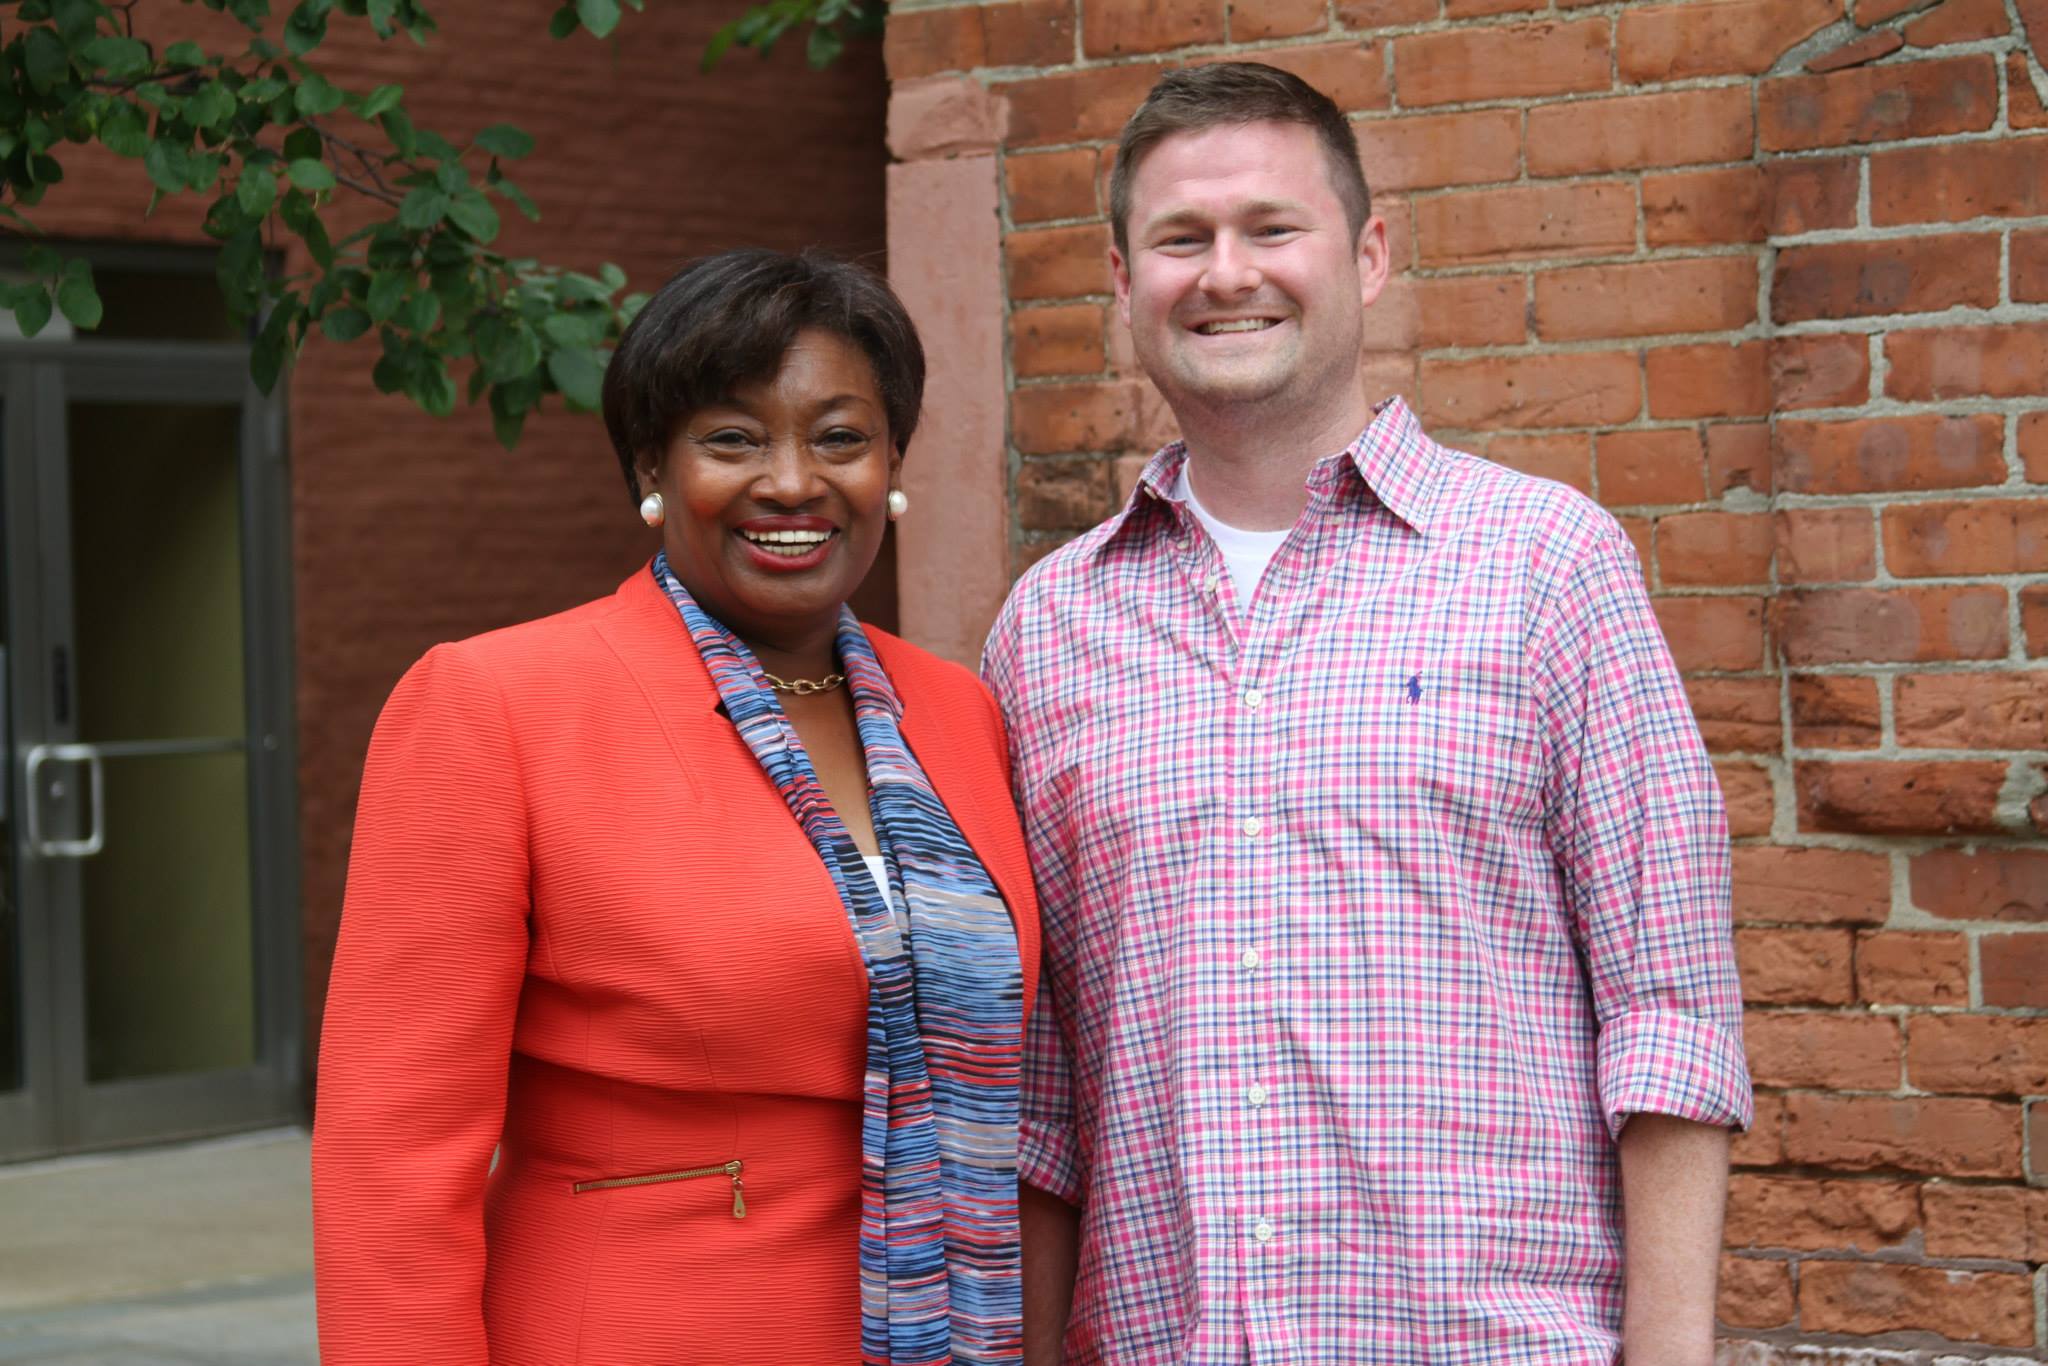 Pat with New York State Senator Andrea Stewart-Cousins. (Photo: Facebook / Quinn 4 the Win)